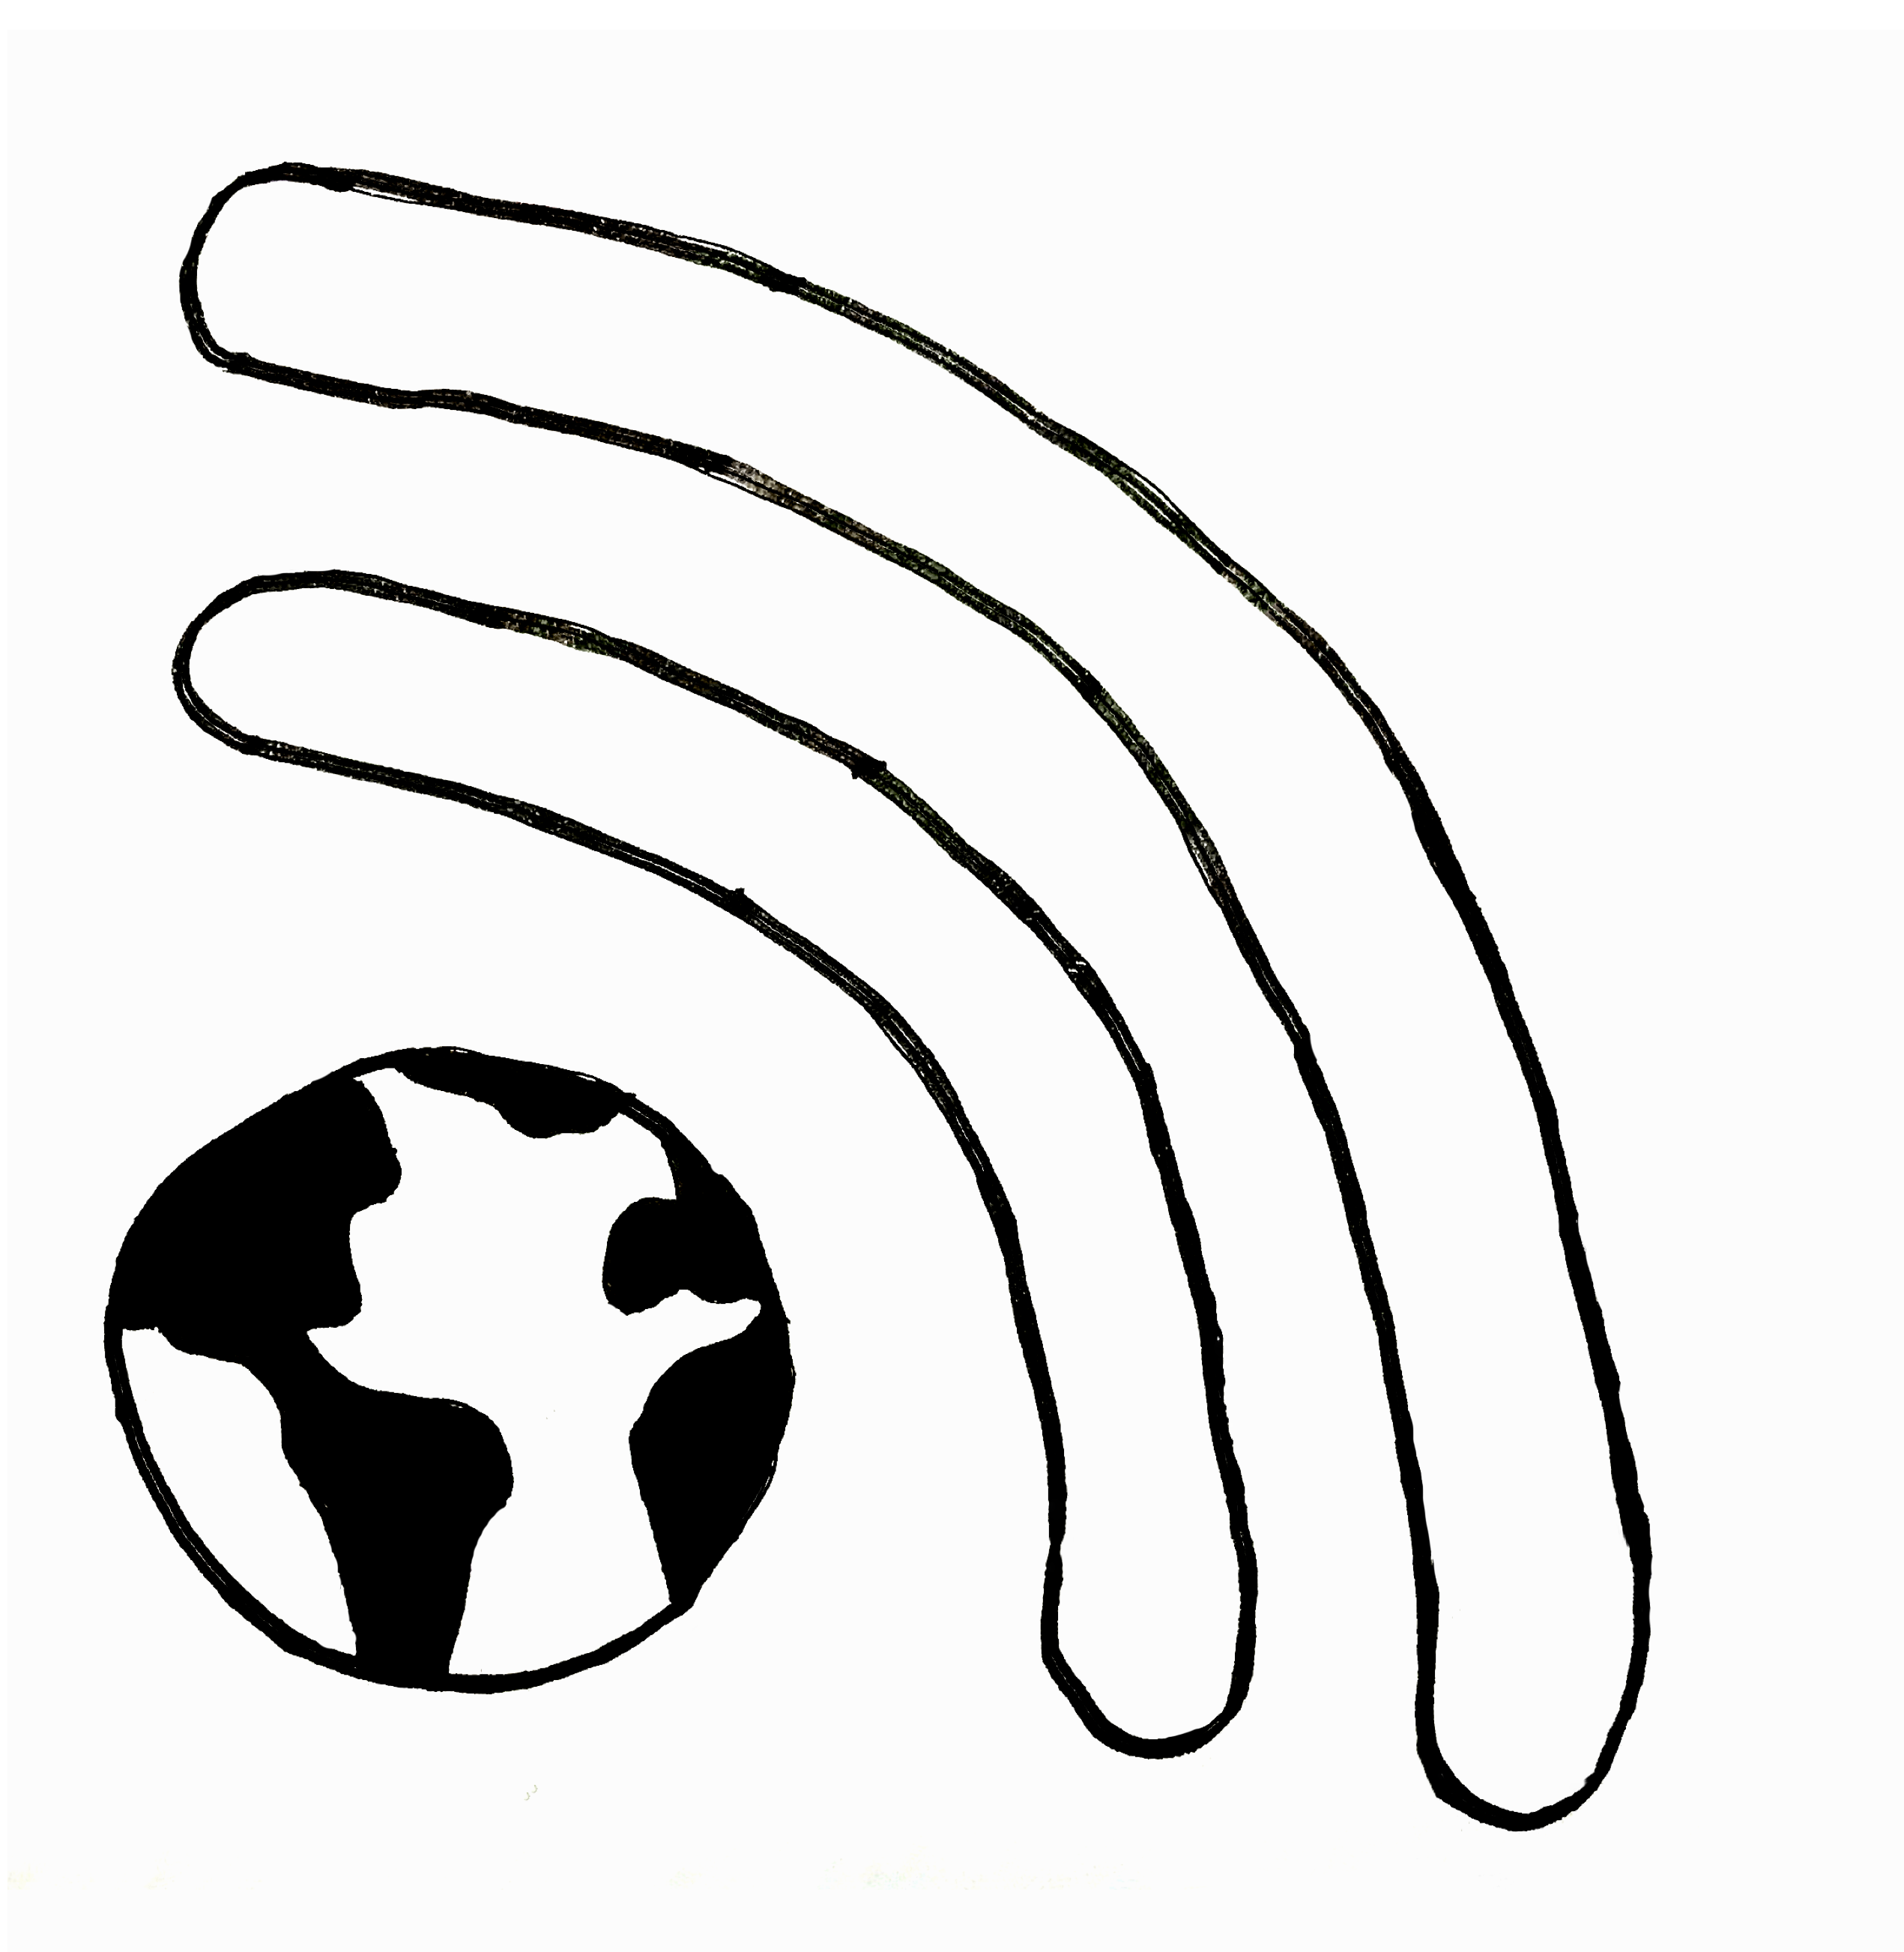 An illustration of Earth with WiFi signals shooting out of it.